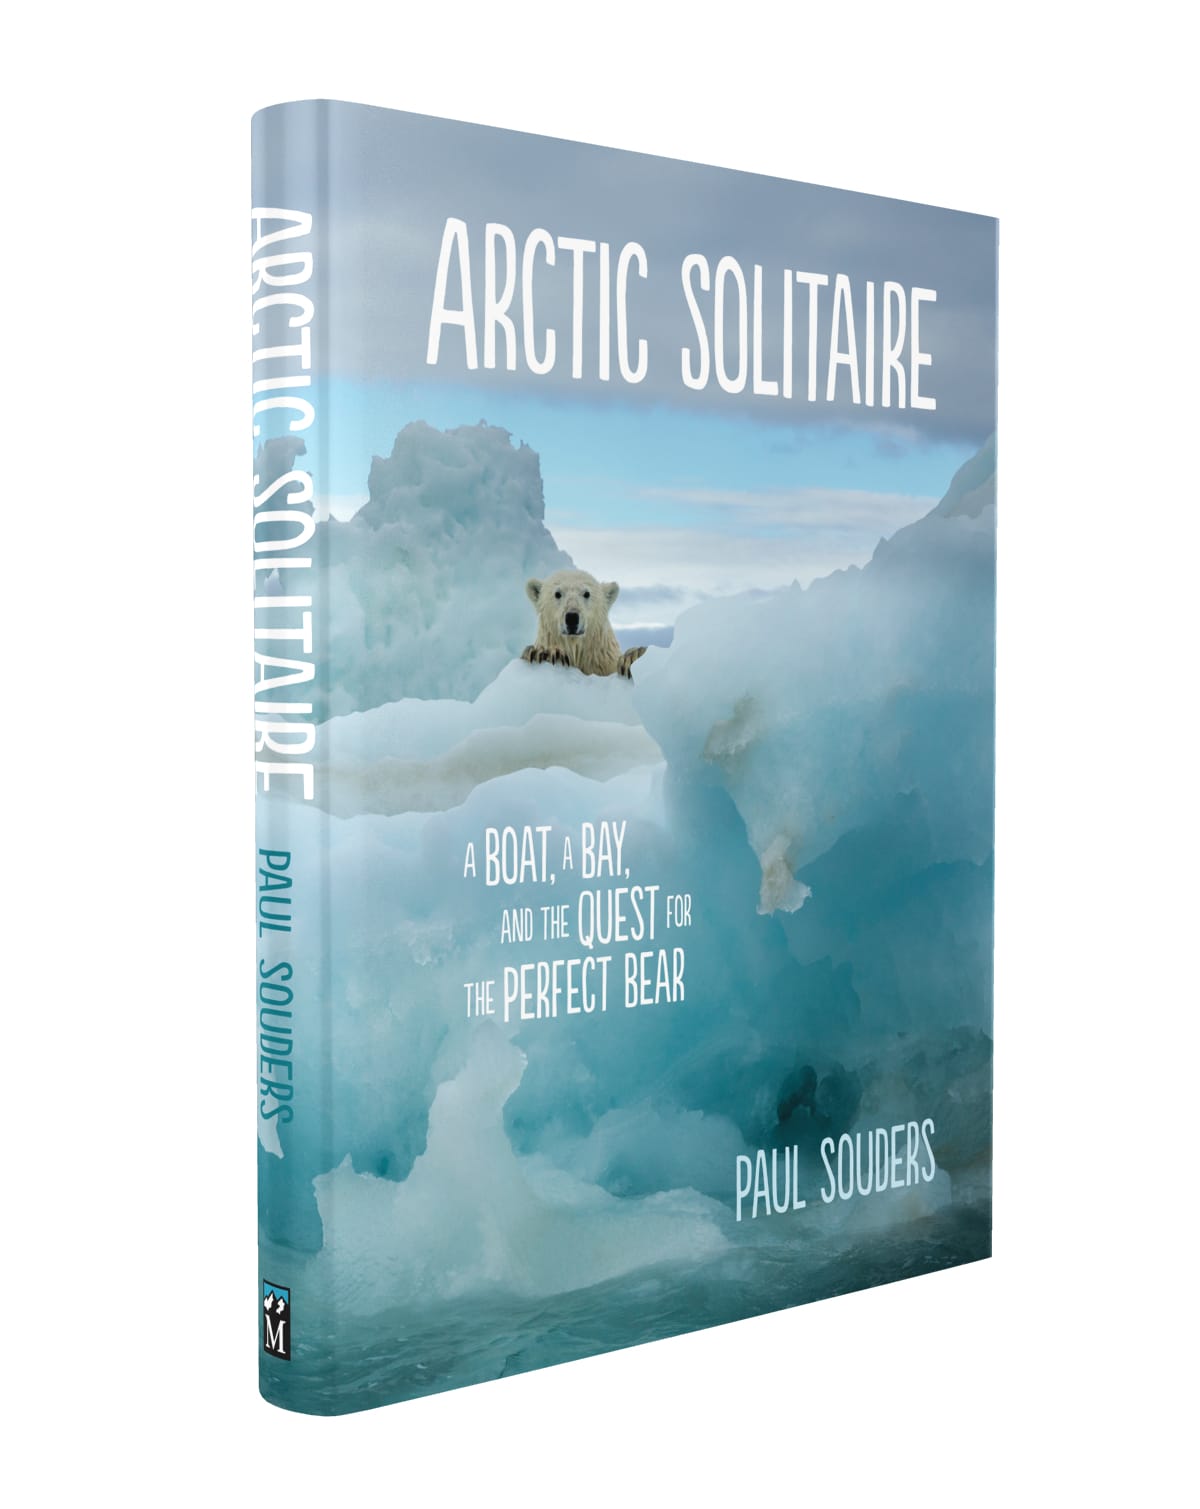 Arctic Solitaire: A Boat, A Bay, and the Quest for the Perfect Bear